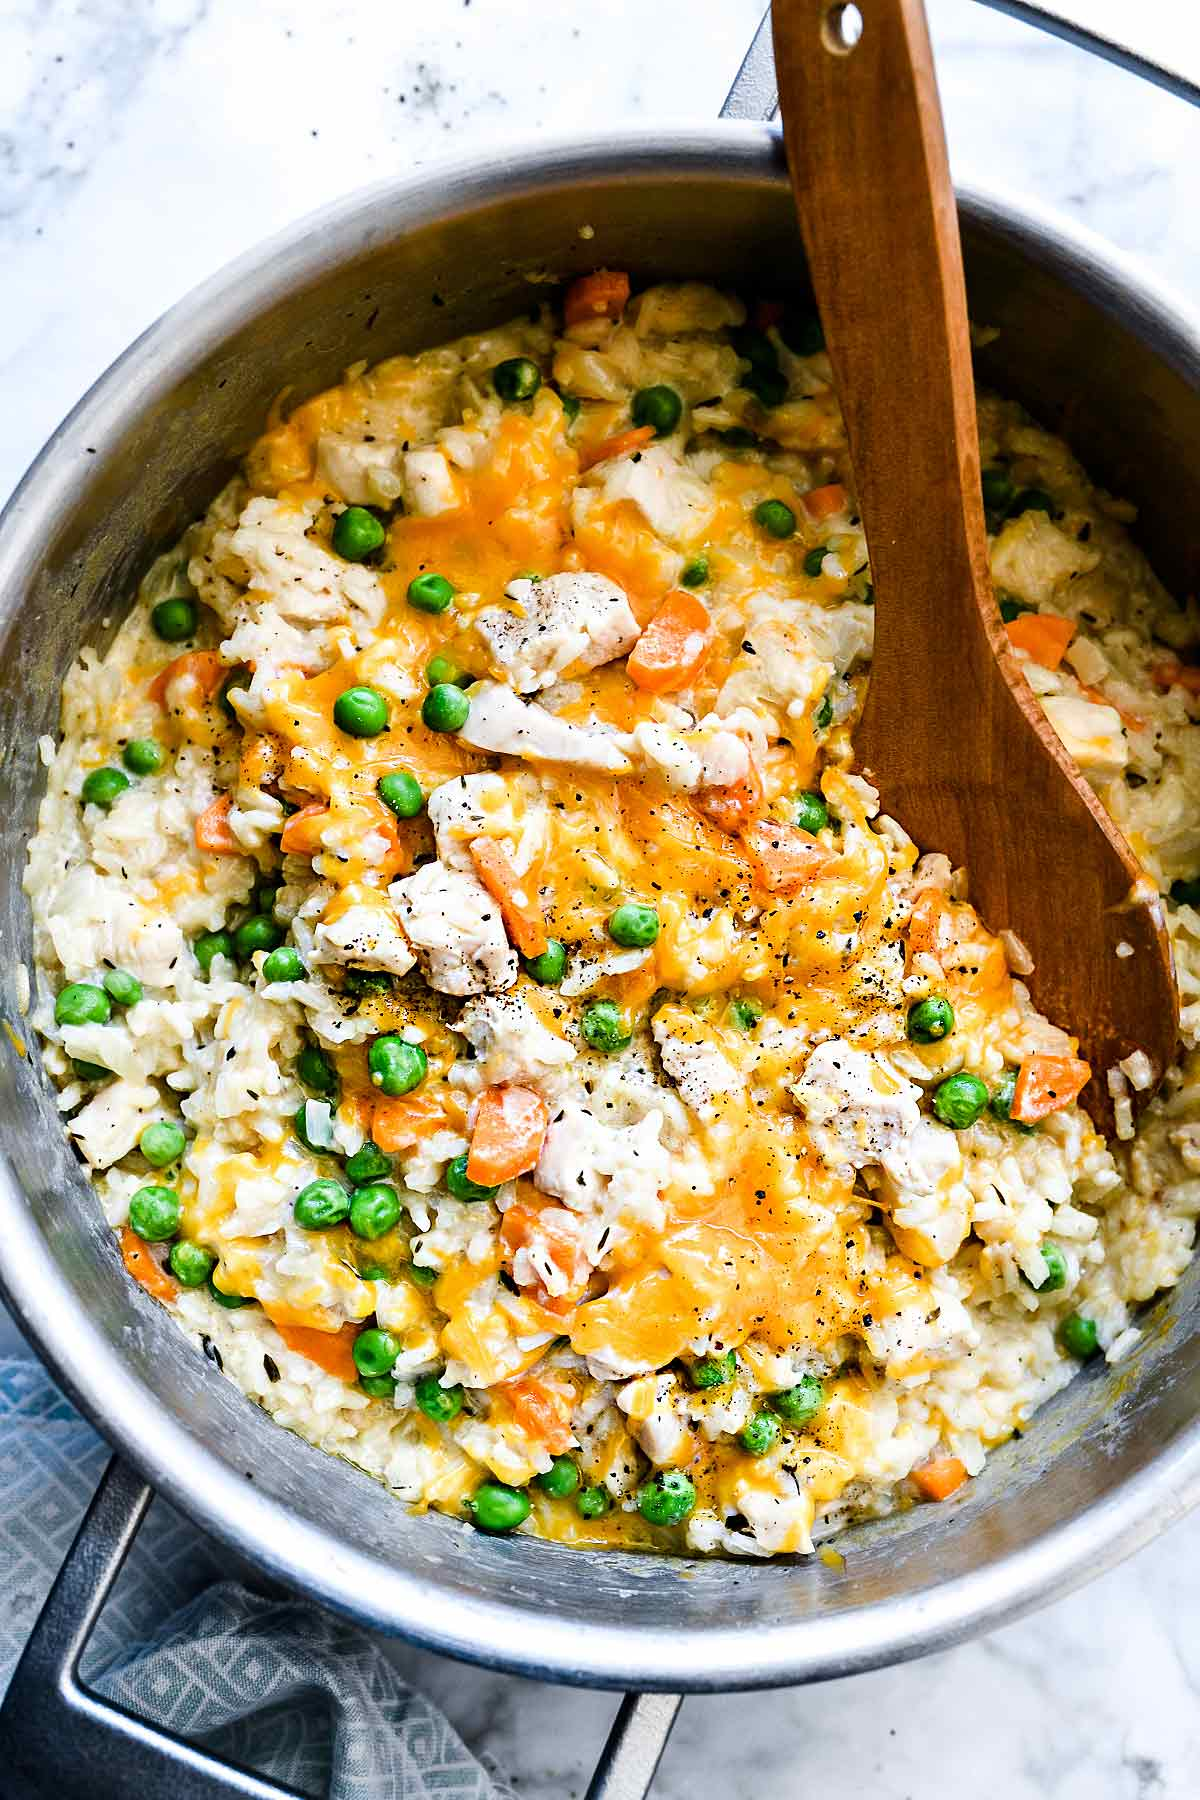 One Pot Chicken and Rice Casserole | foodiecrush.com #chicken #casserole #casserole #rice #white #recipes #healthy